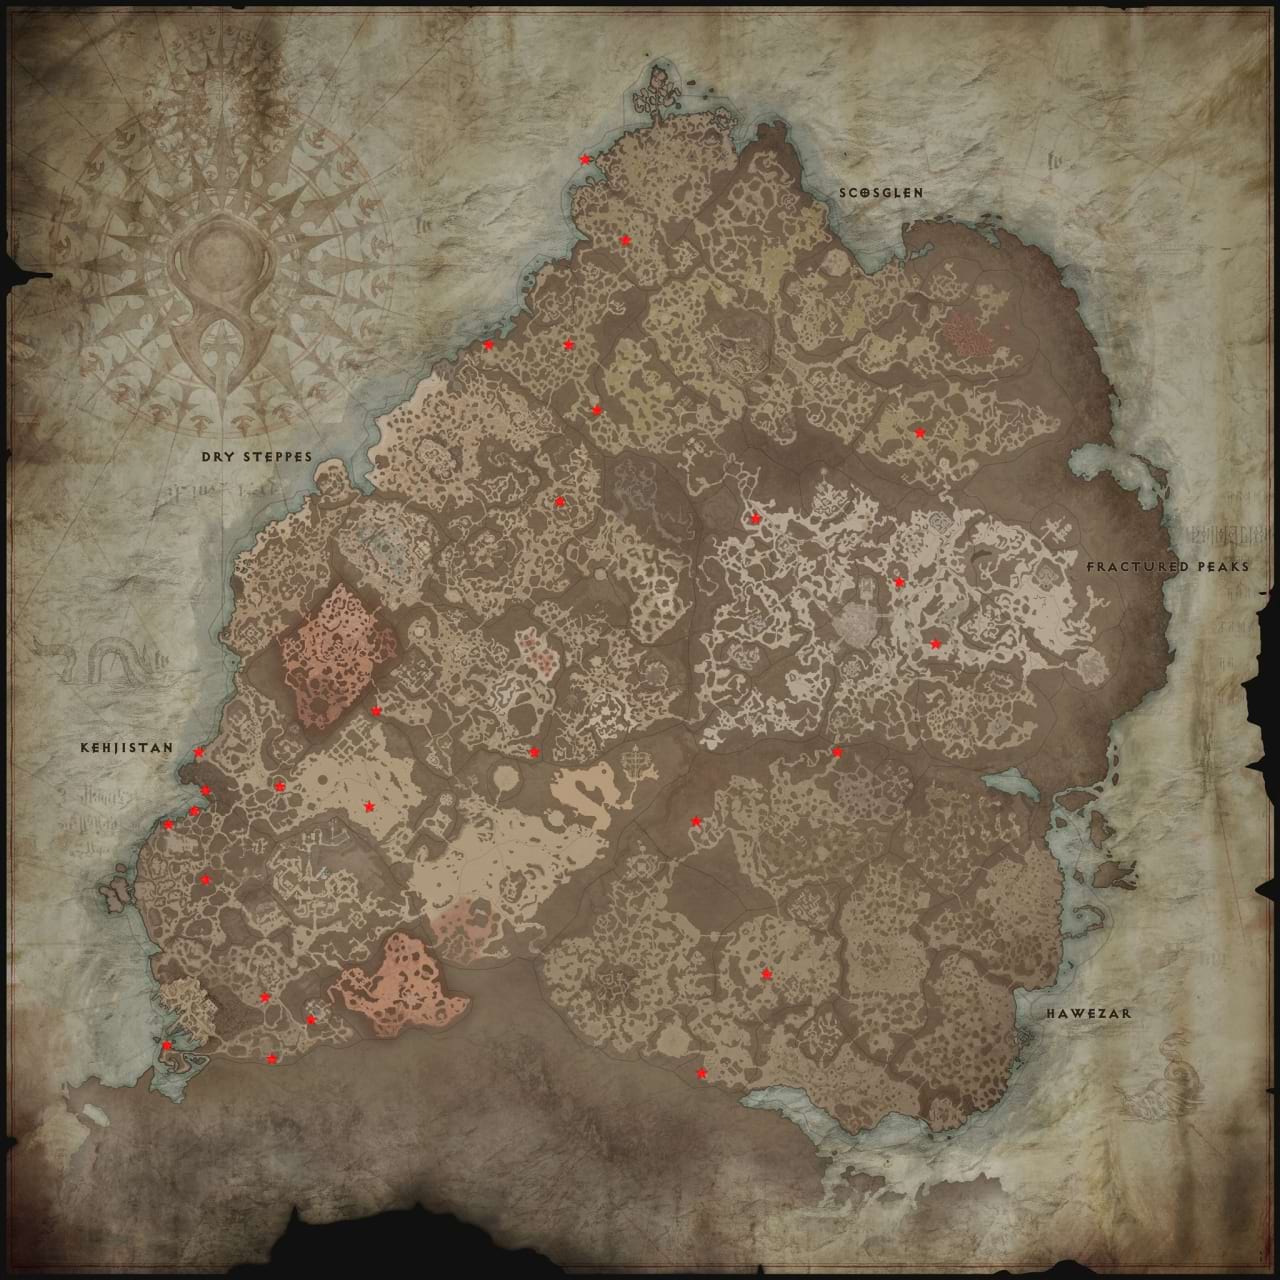 Diablo 4 Helltide Tortured Gift of Mystery Chest Locations: When & Where To Find Mystery Chests